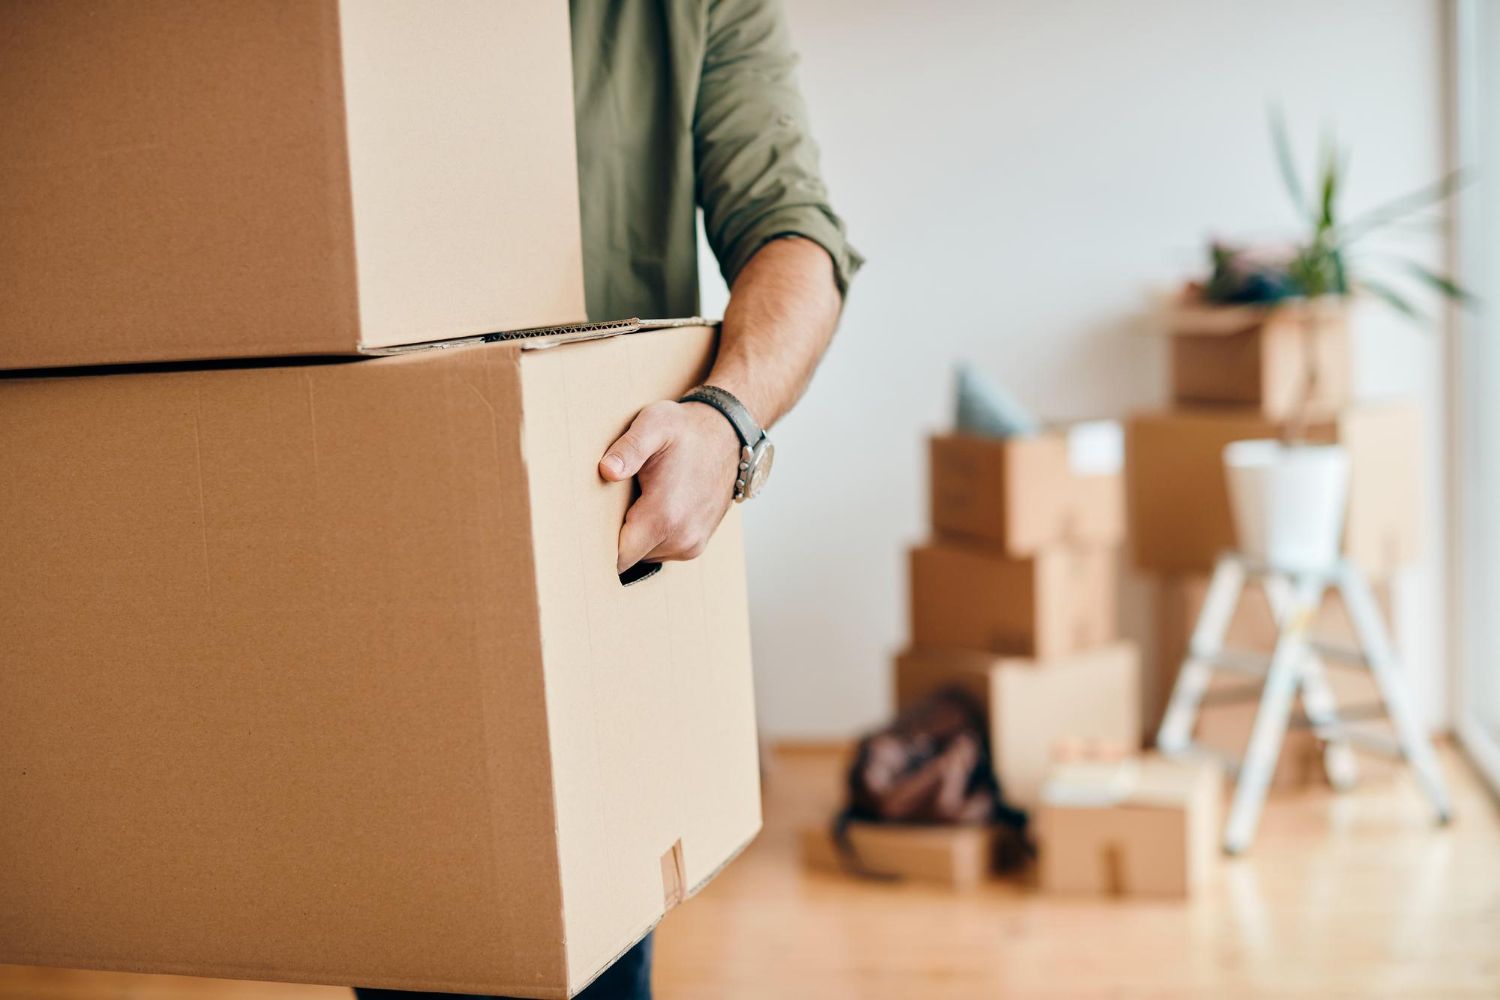 5 Practical Tips To Make Your Move Less Stressful